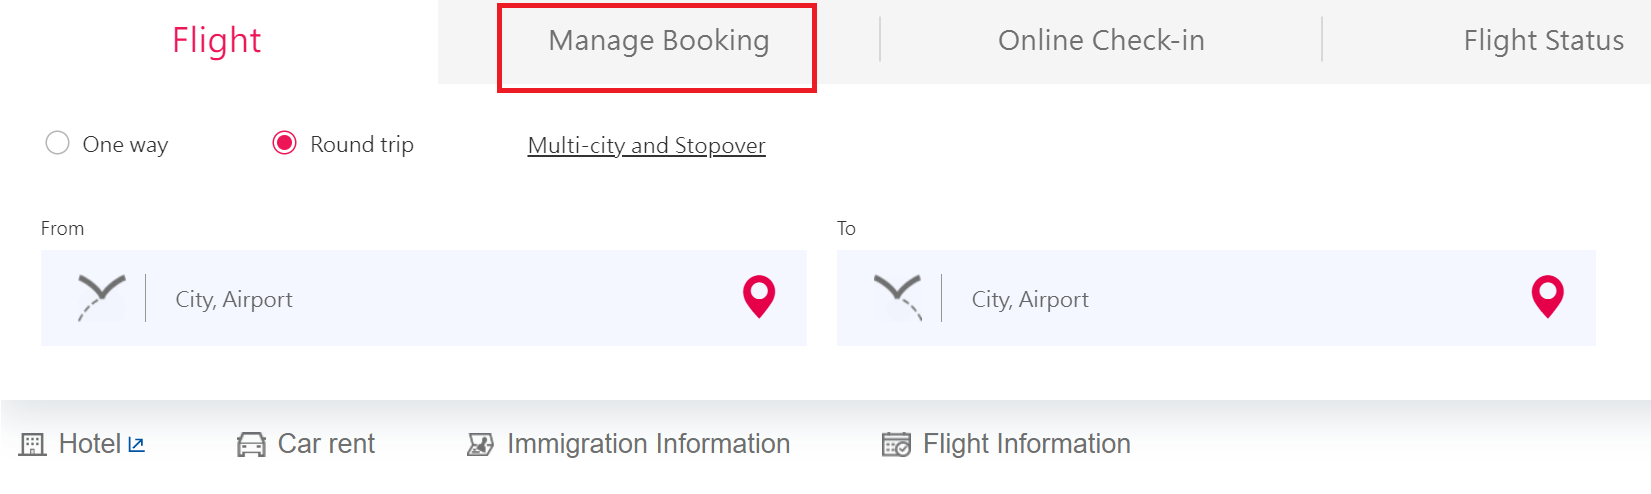 china airline manage booking tab